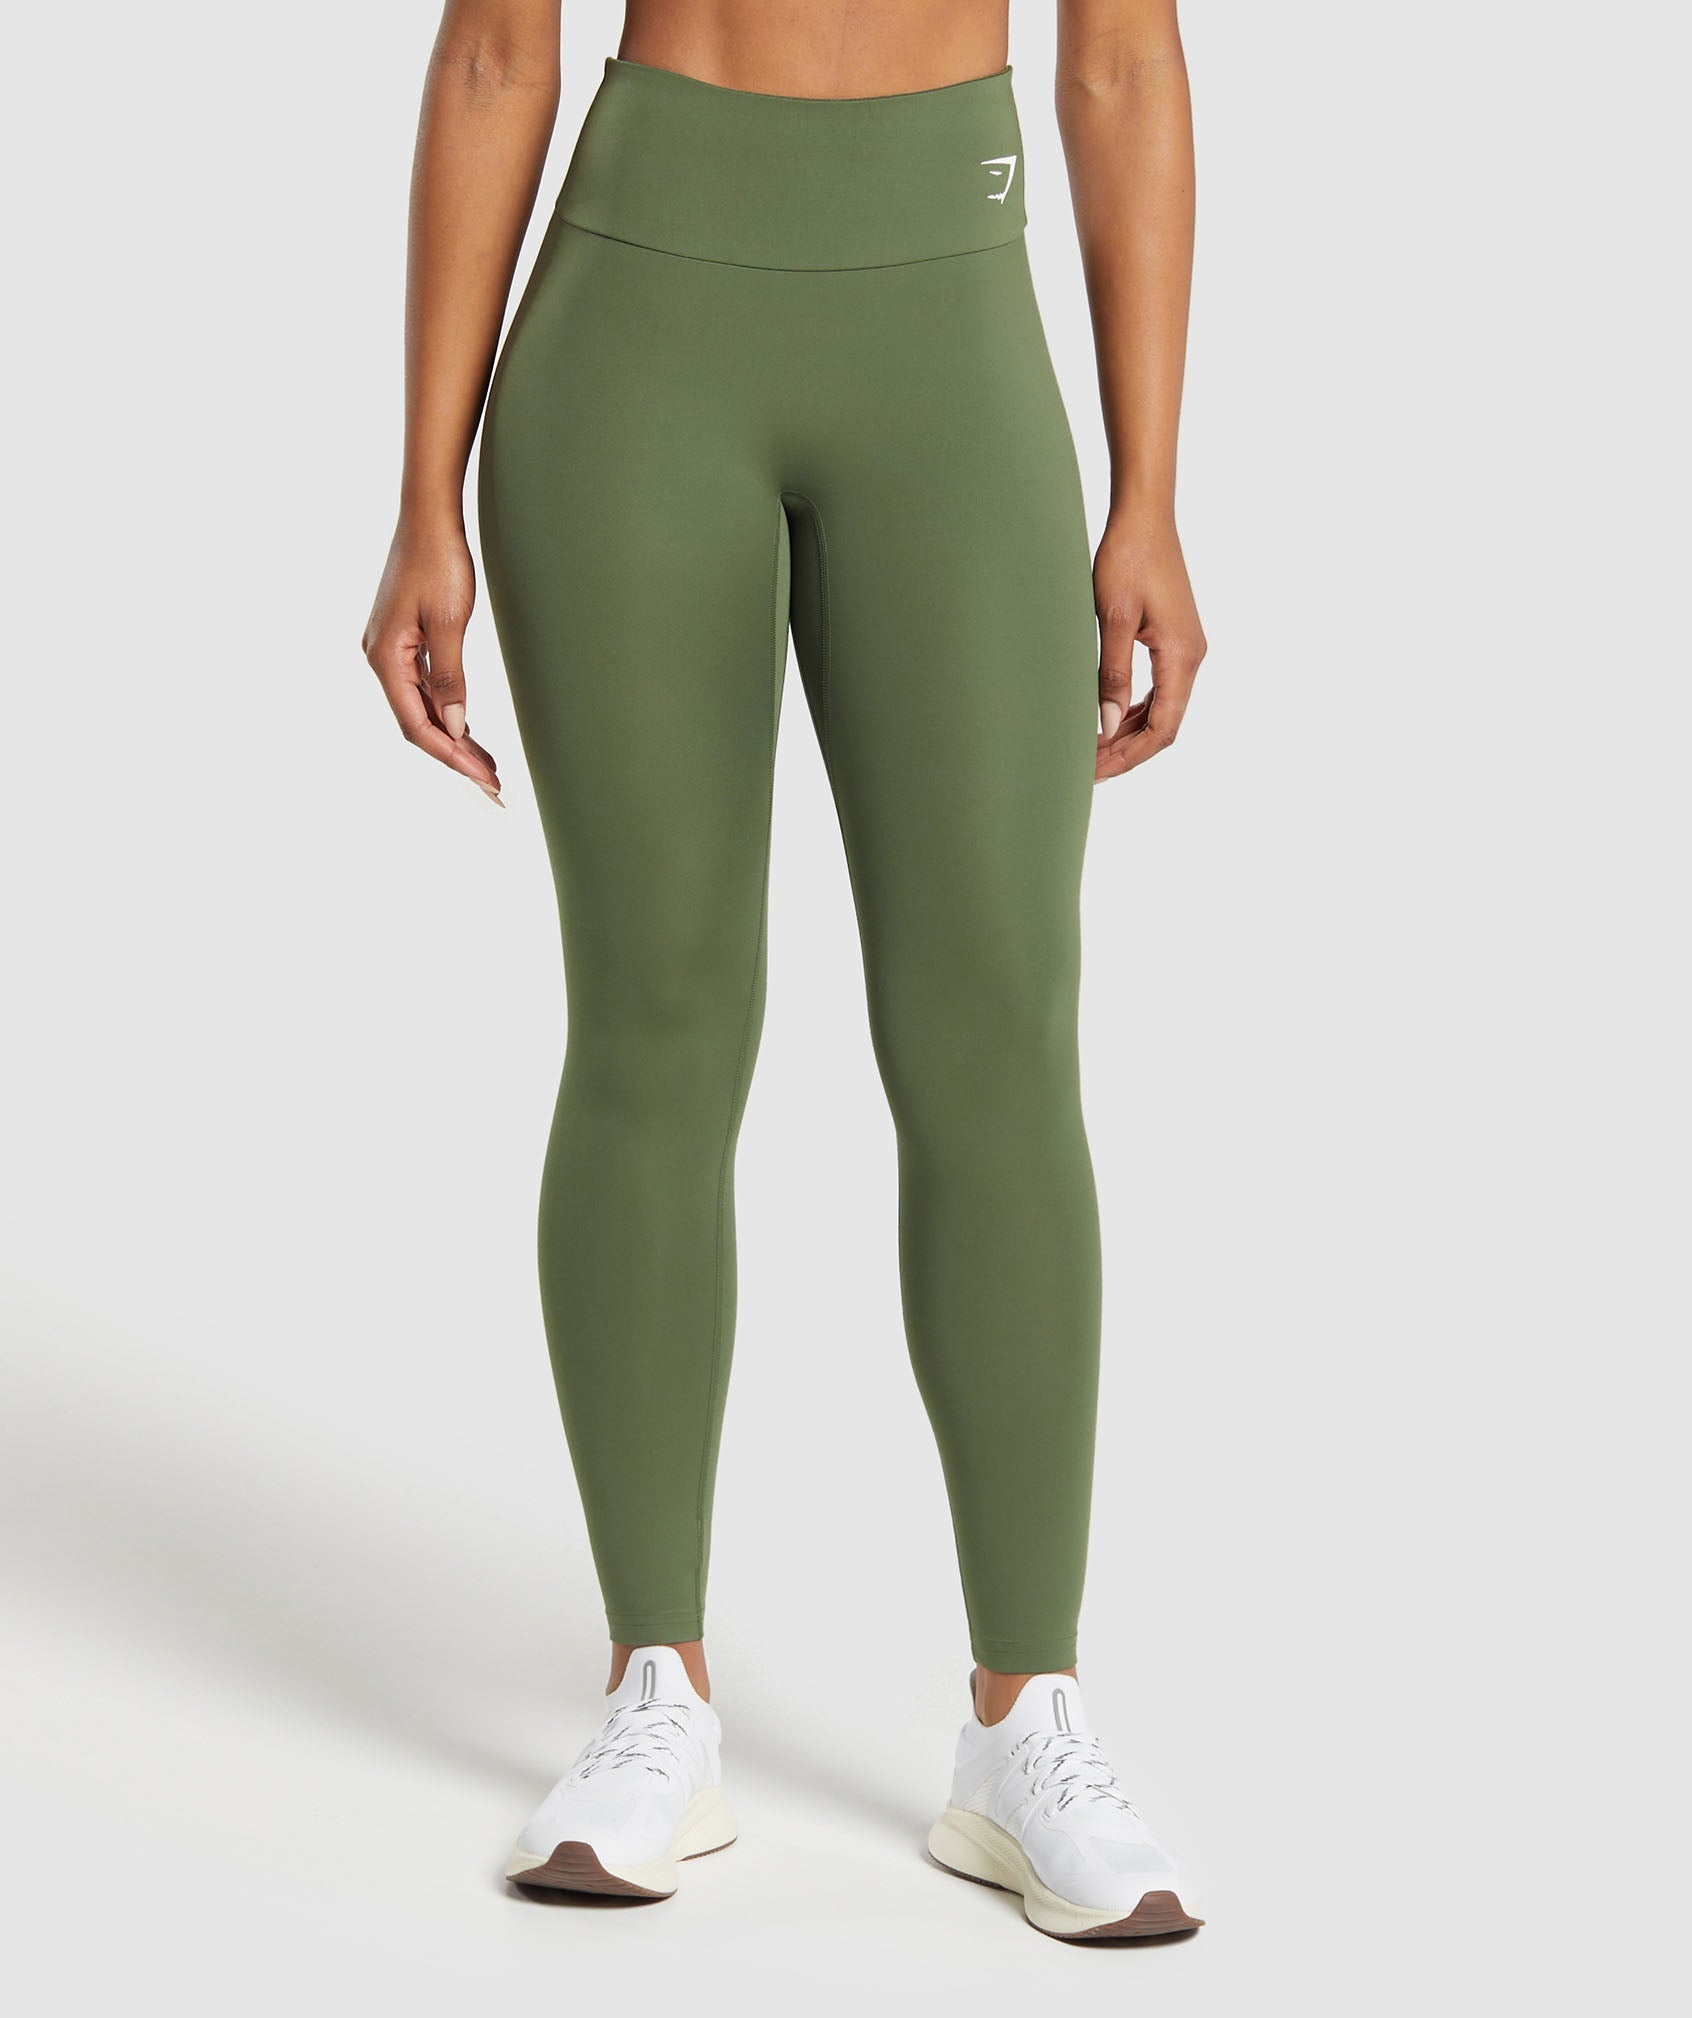 Training Leggings in {{variantColor} is out of stock